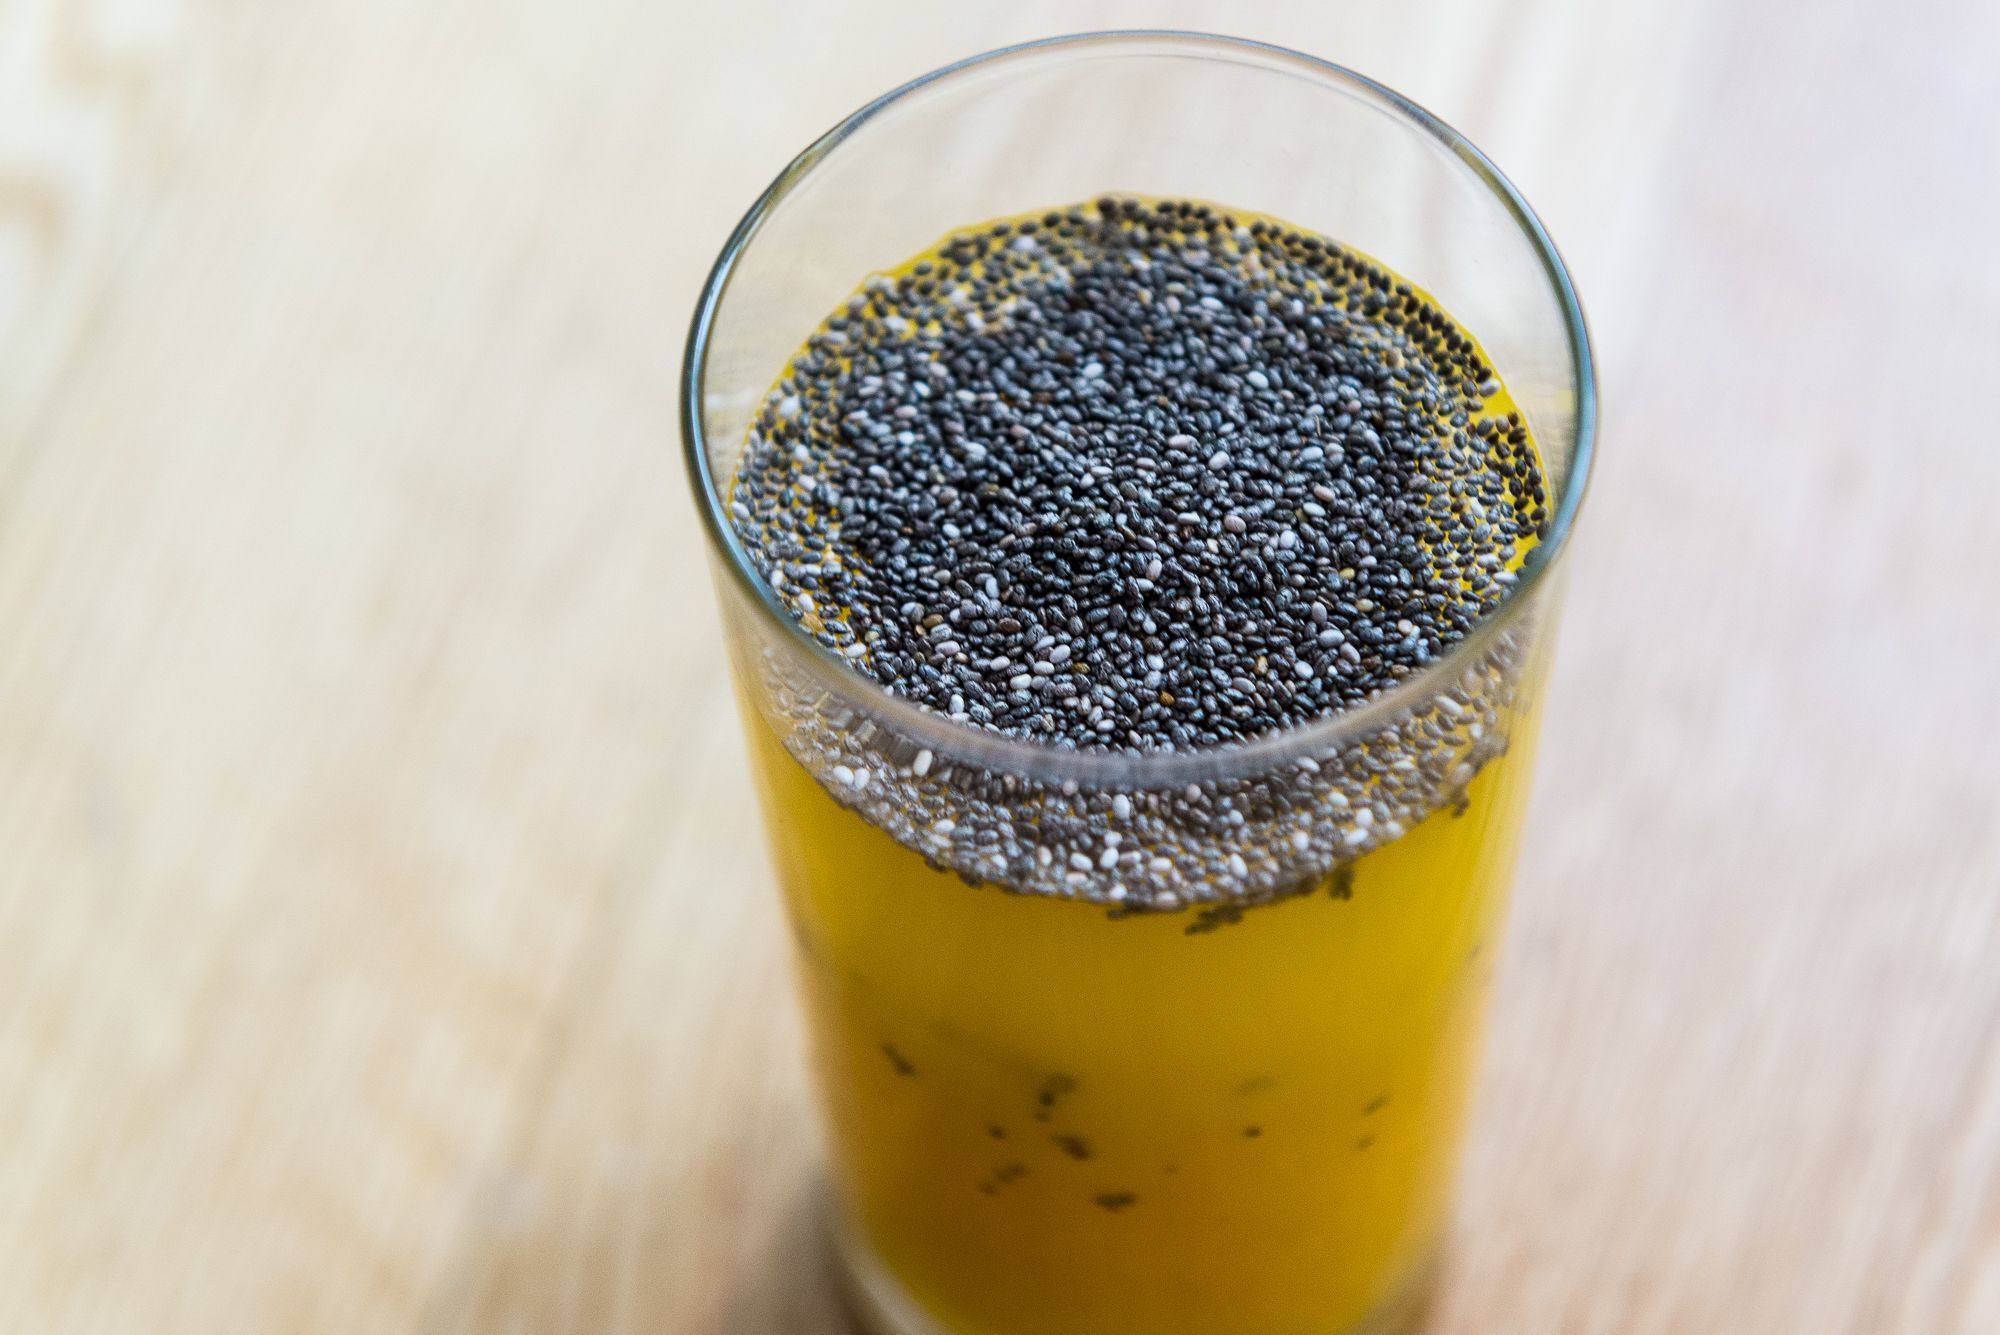 How Do You Drink Chia Seeds